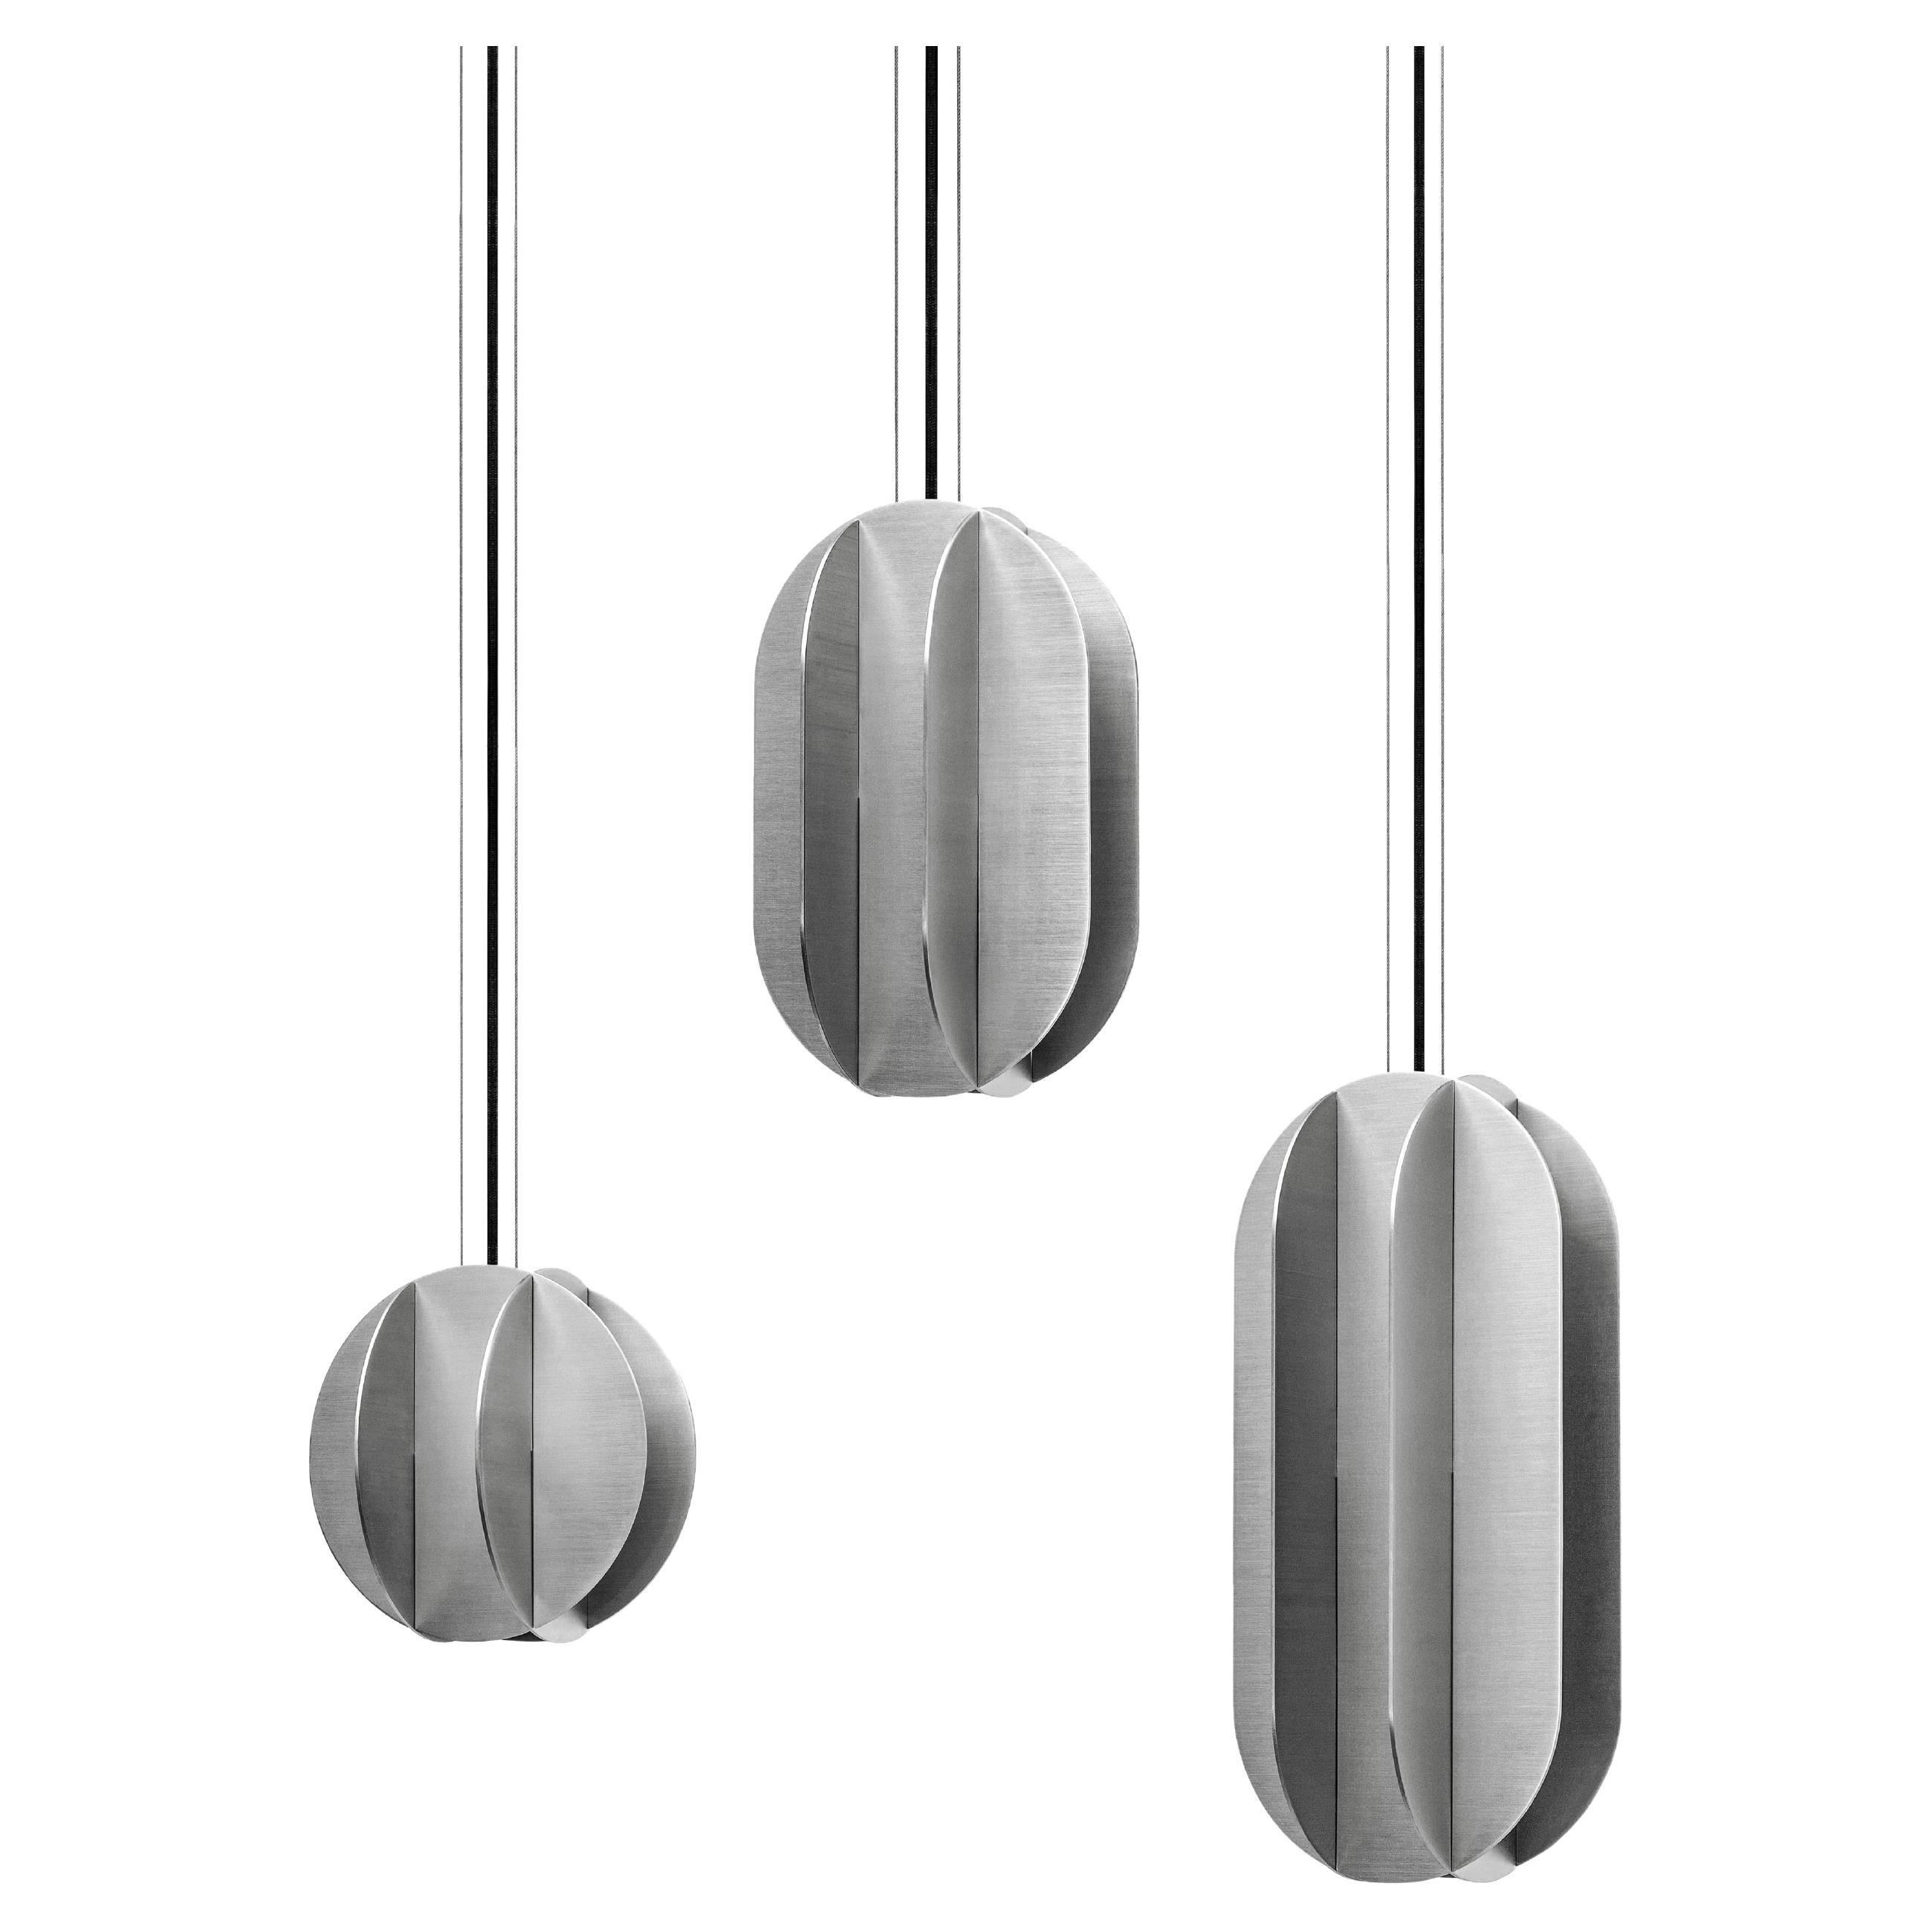 Set of Three Contemporary Pendant Lamp El Lamps CS3 by Noom in Stainless Steel